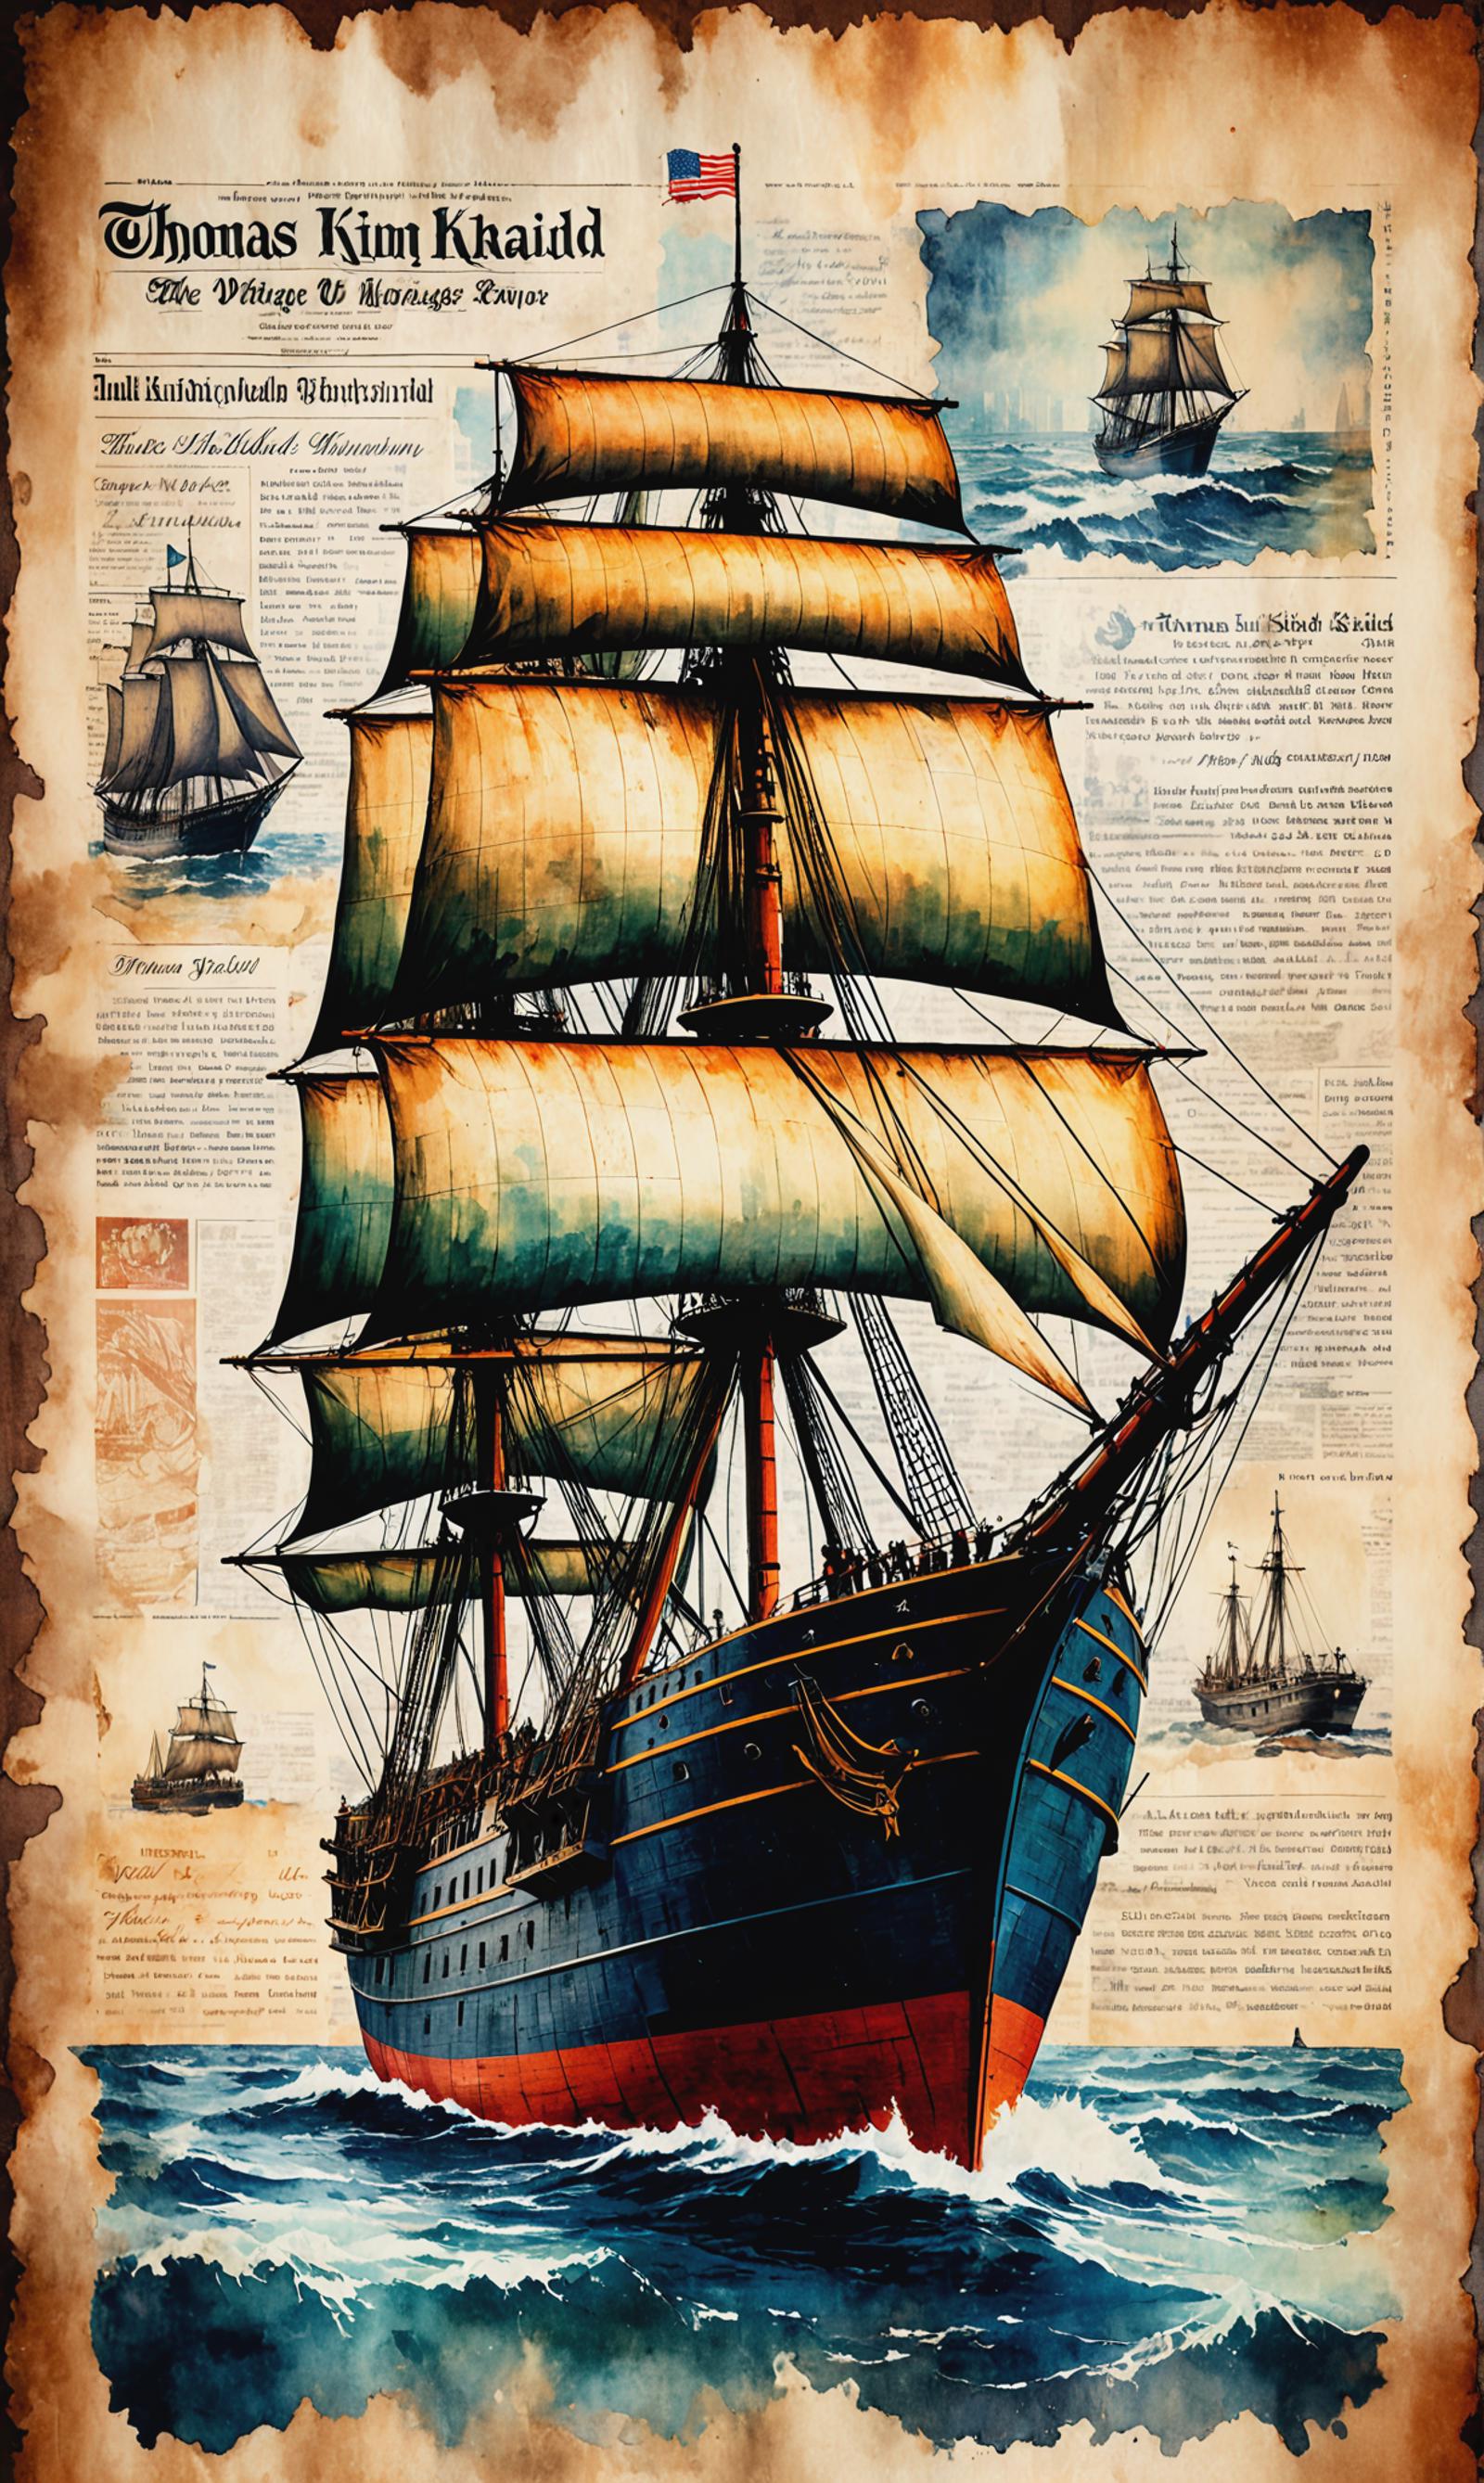 A colorful illustration of a sailing ship with people on board.